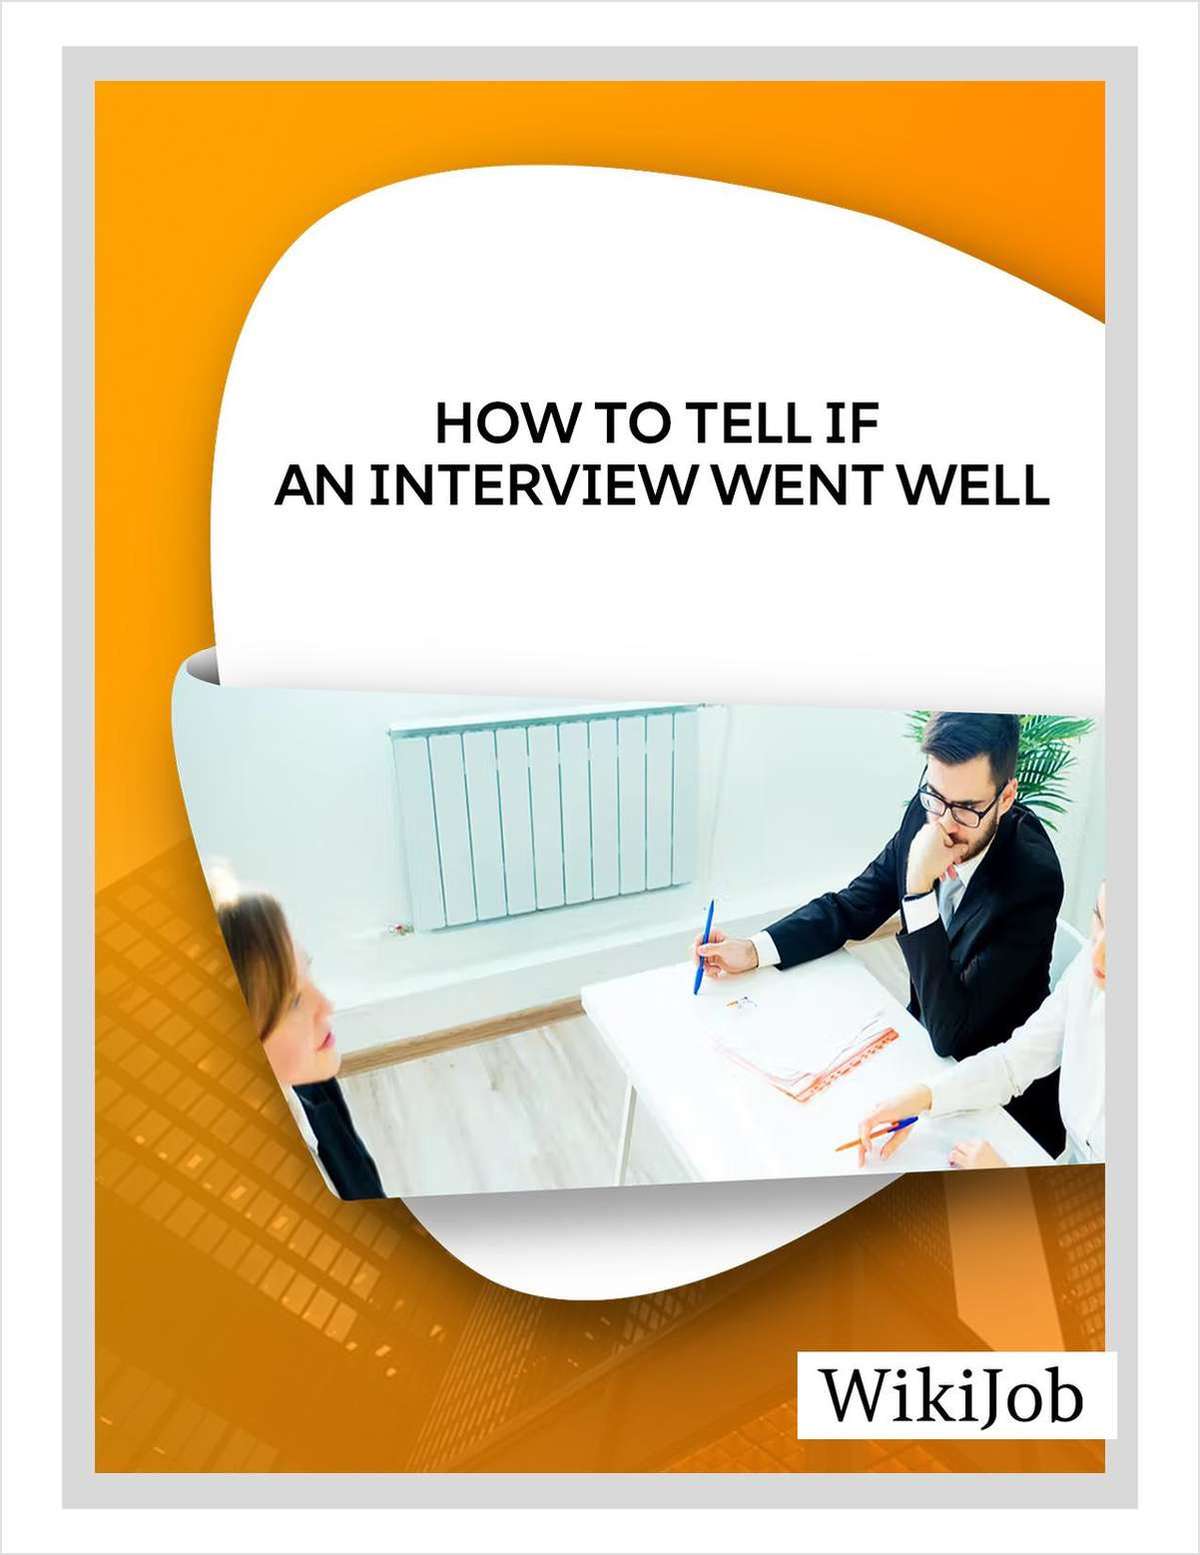 How to Tell if an Interview Went Well